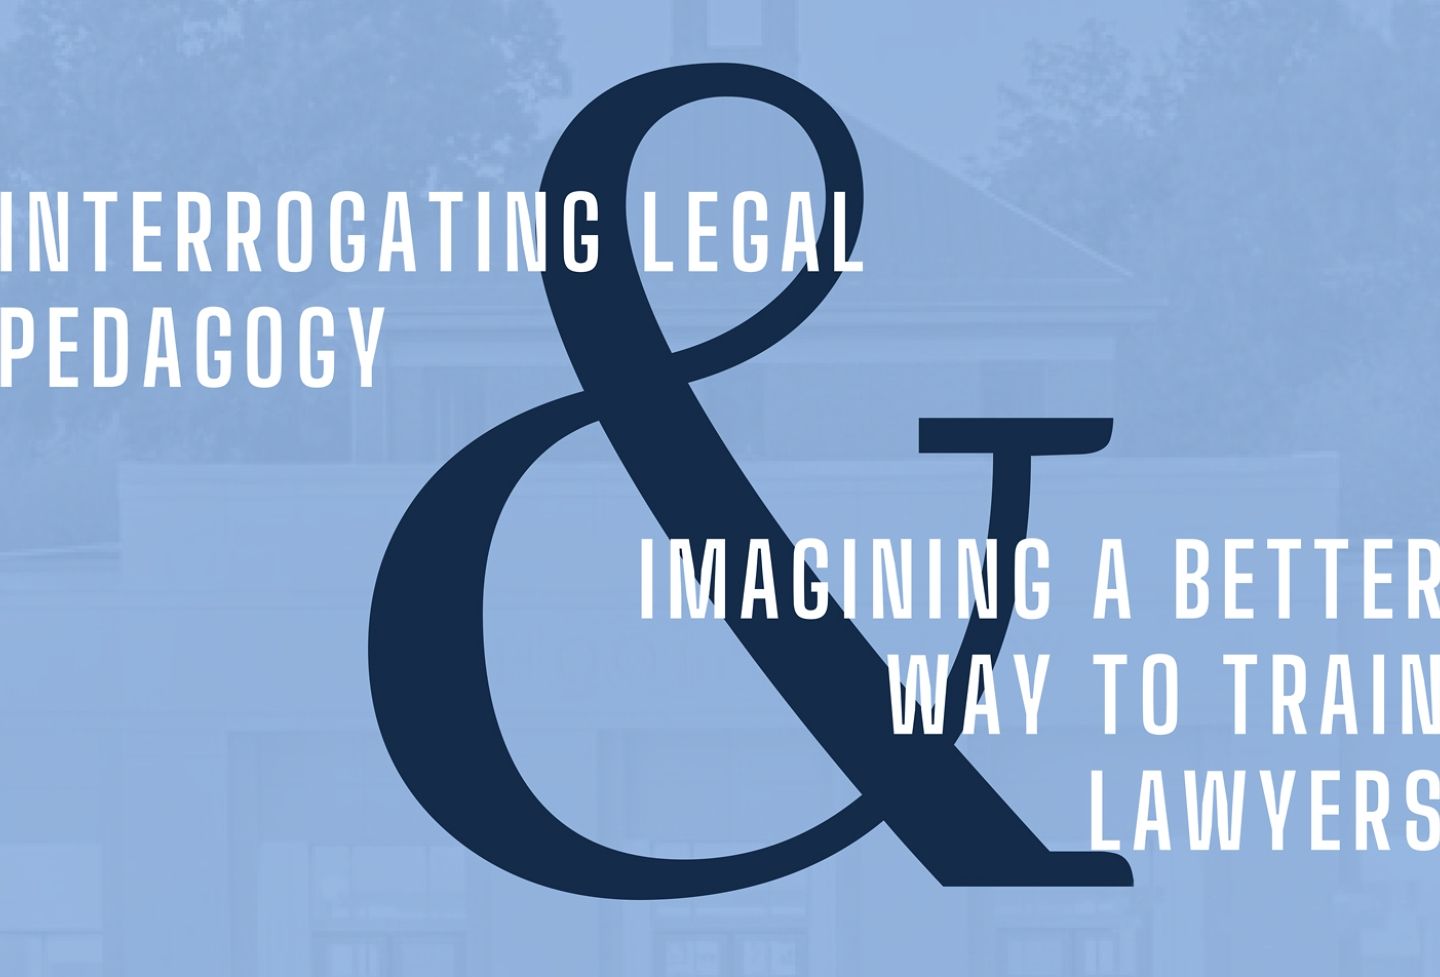 “Interrogating Legal Pedagogy and Imagining a Better Way to Train Lawyers”